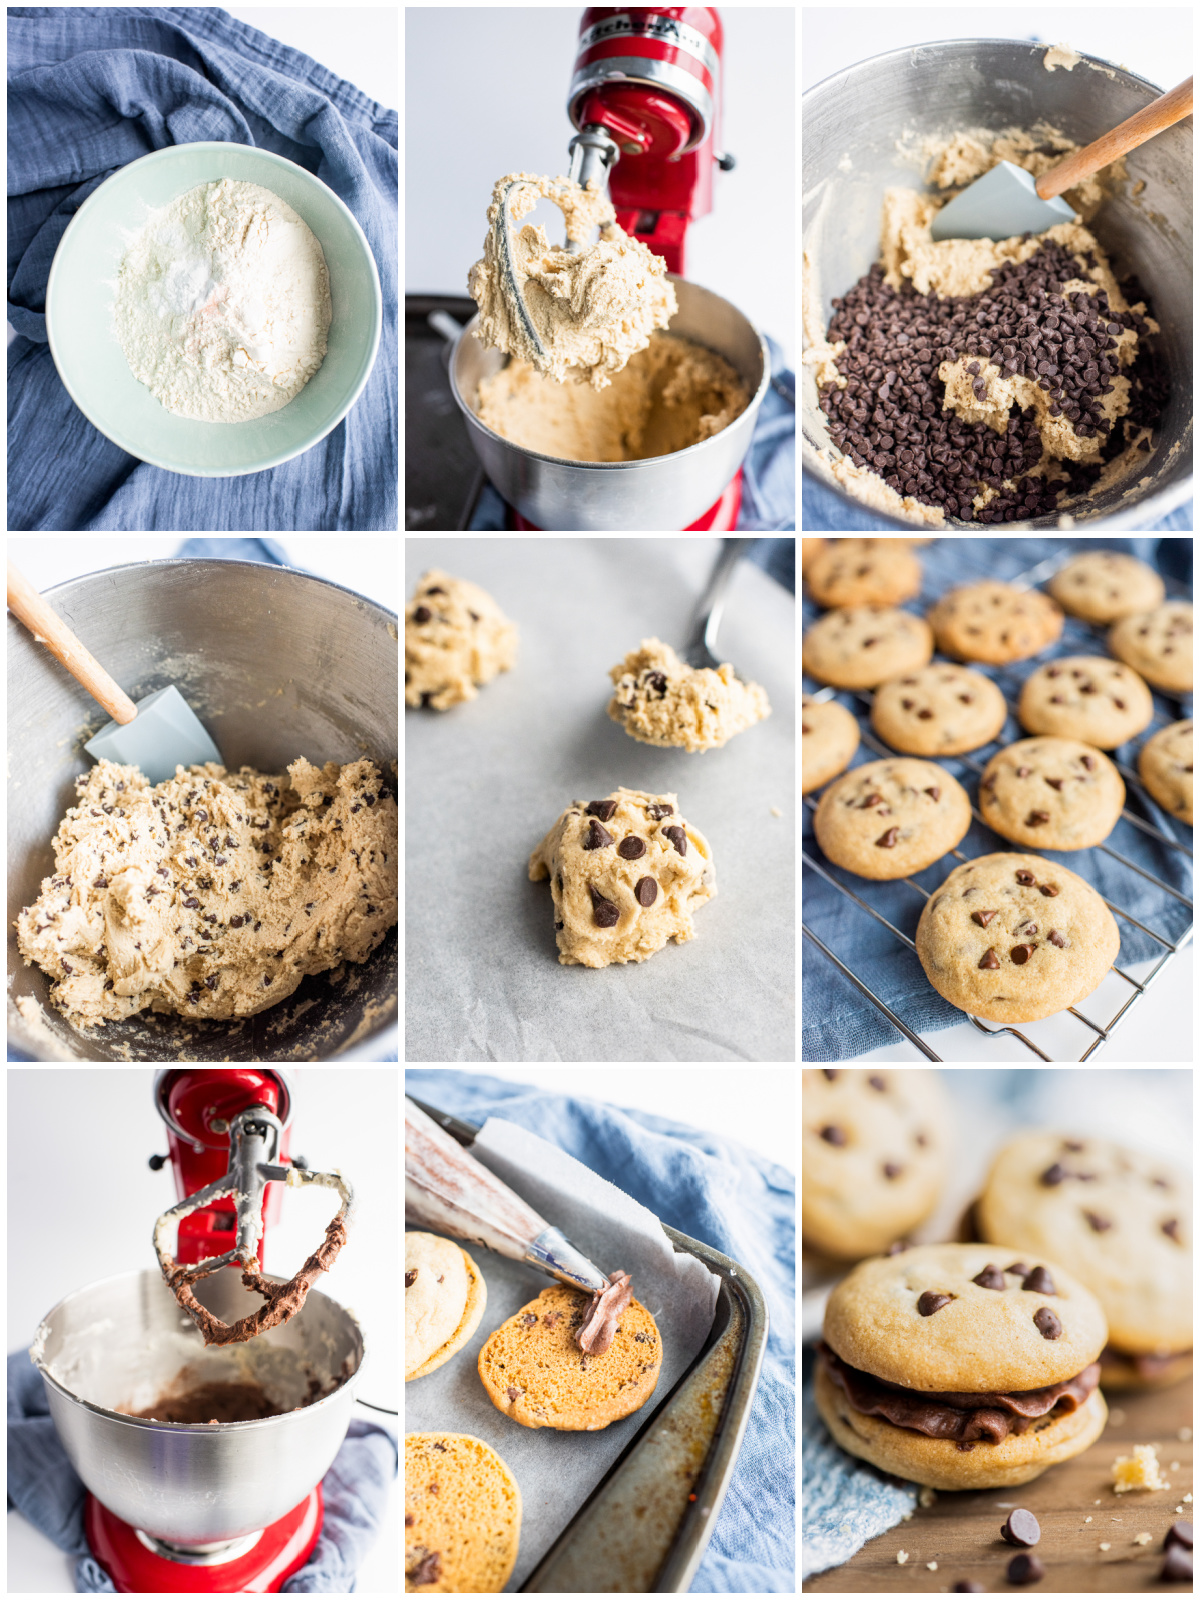 Step by step photos on how to make Chocolate Chip Sandwich Cookies.